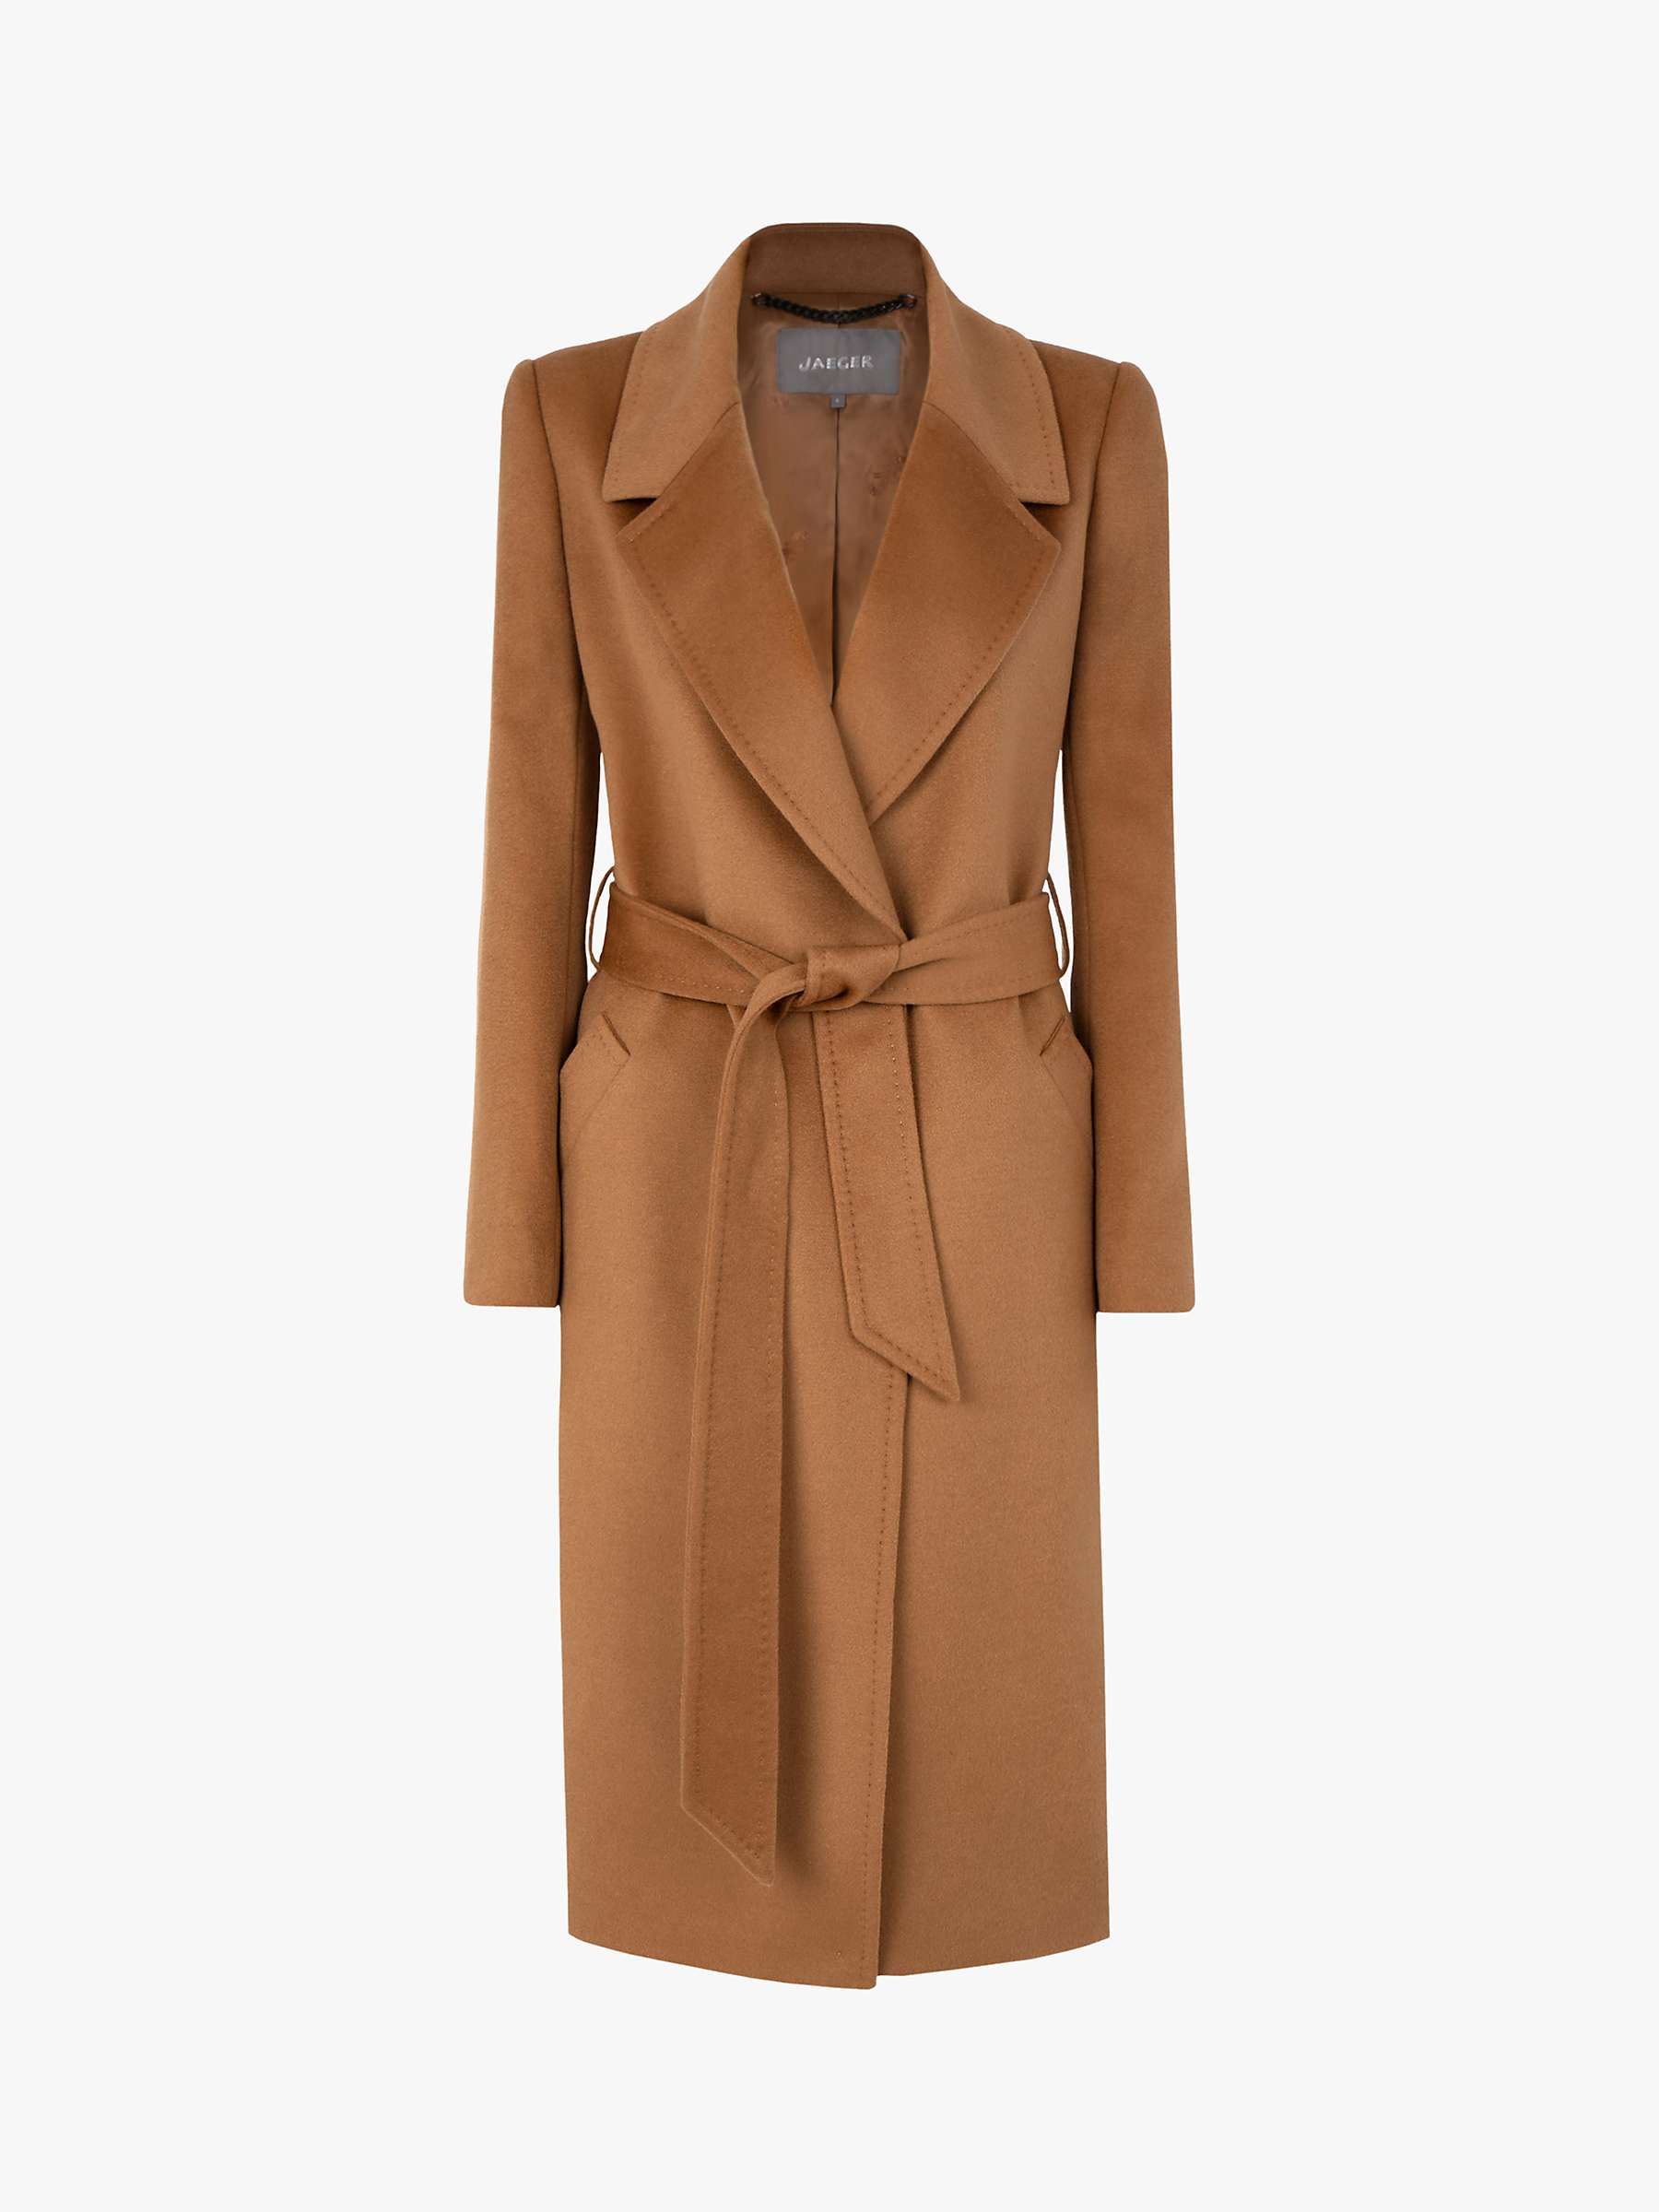 34 Of The Best Camel Coats To Buy Now